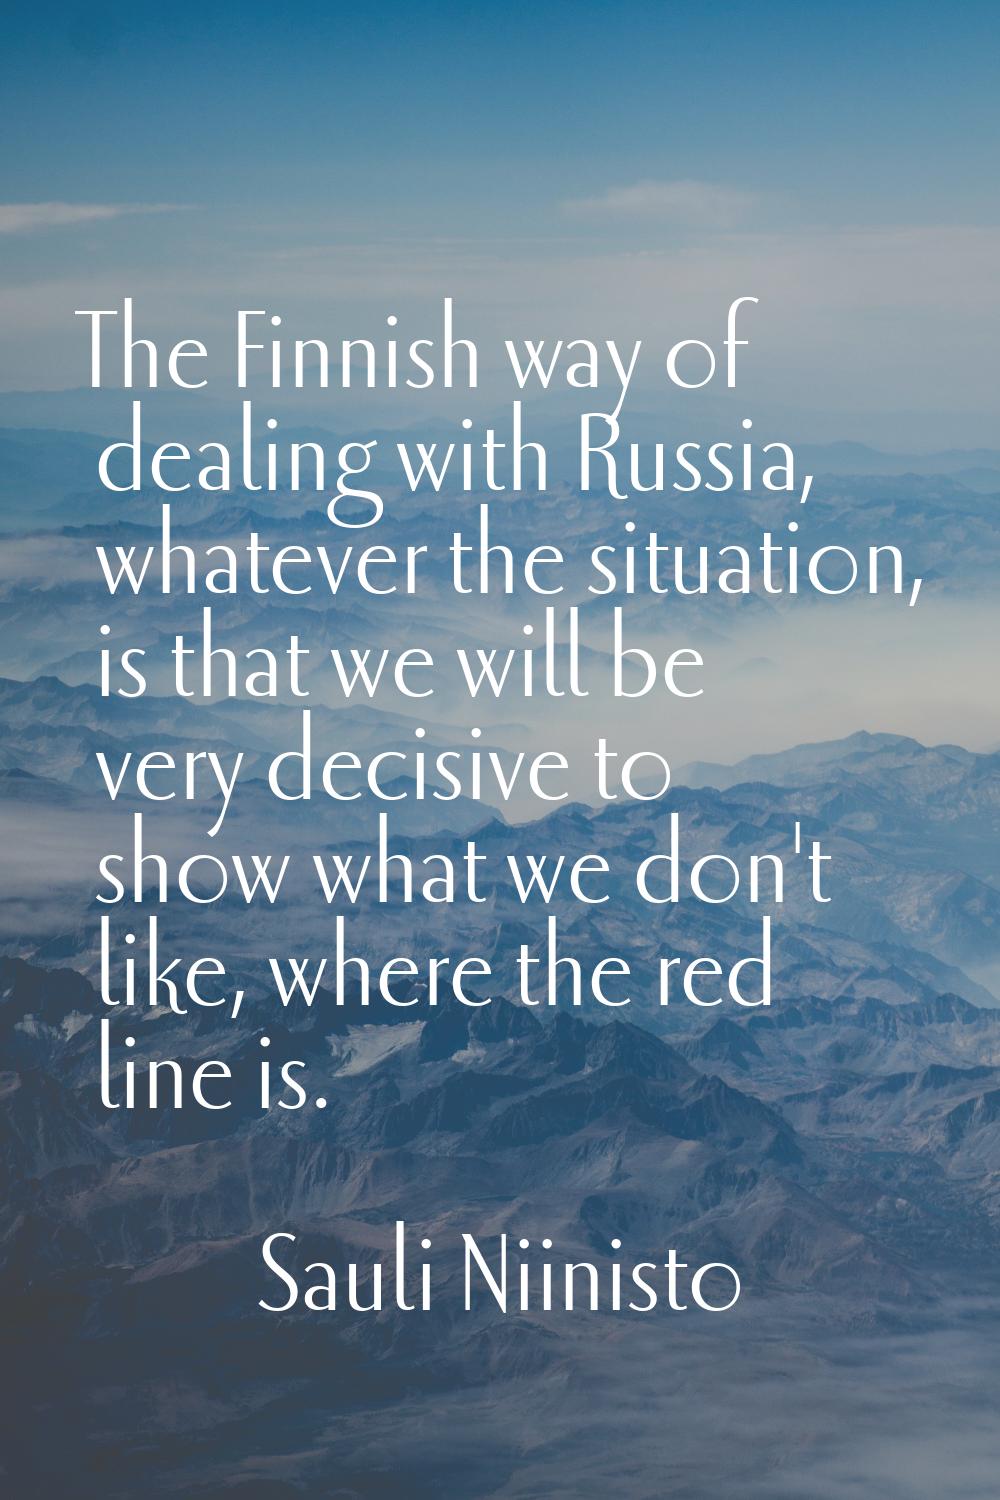 The Finnish way of dealing with Russia, whatever the situation, is that we will be very decisive to